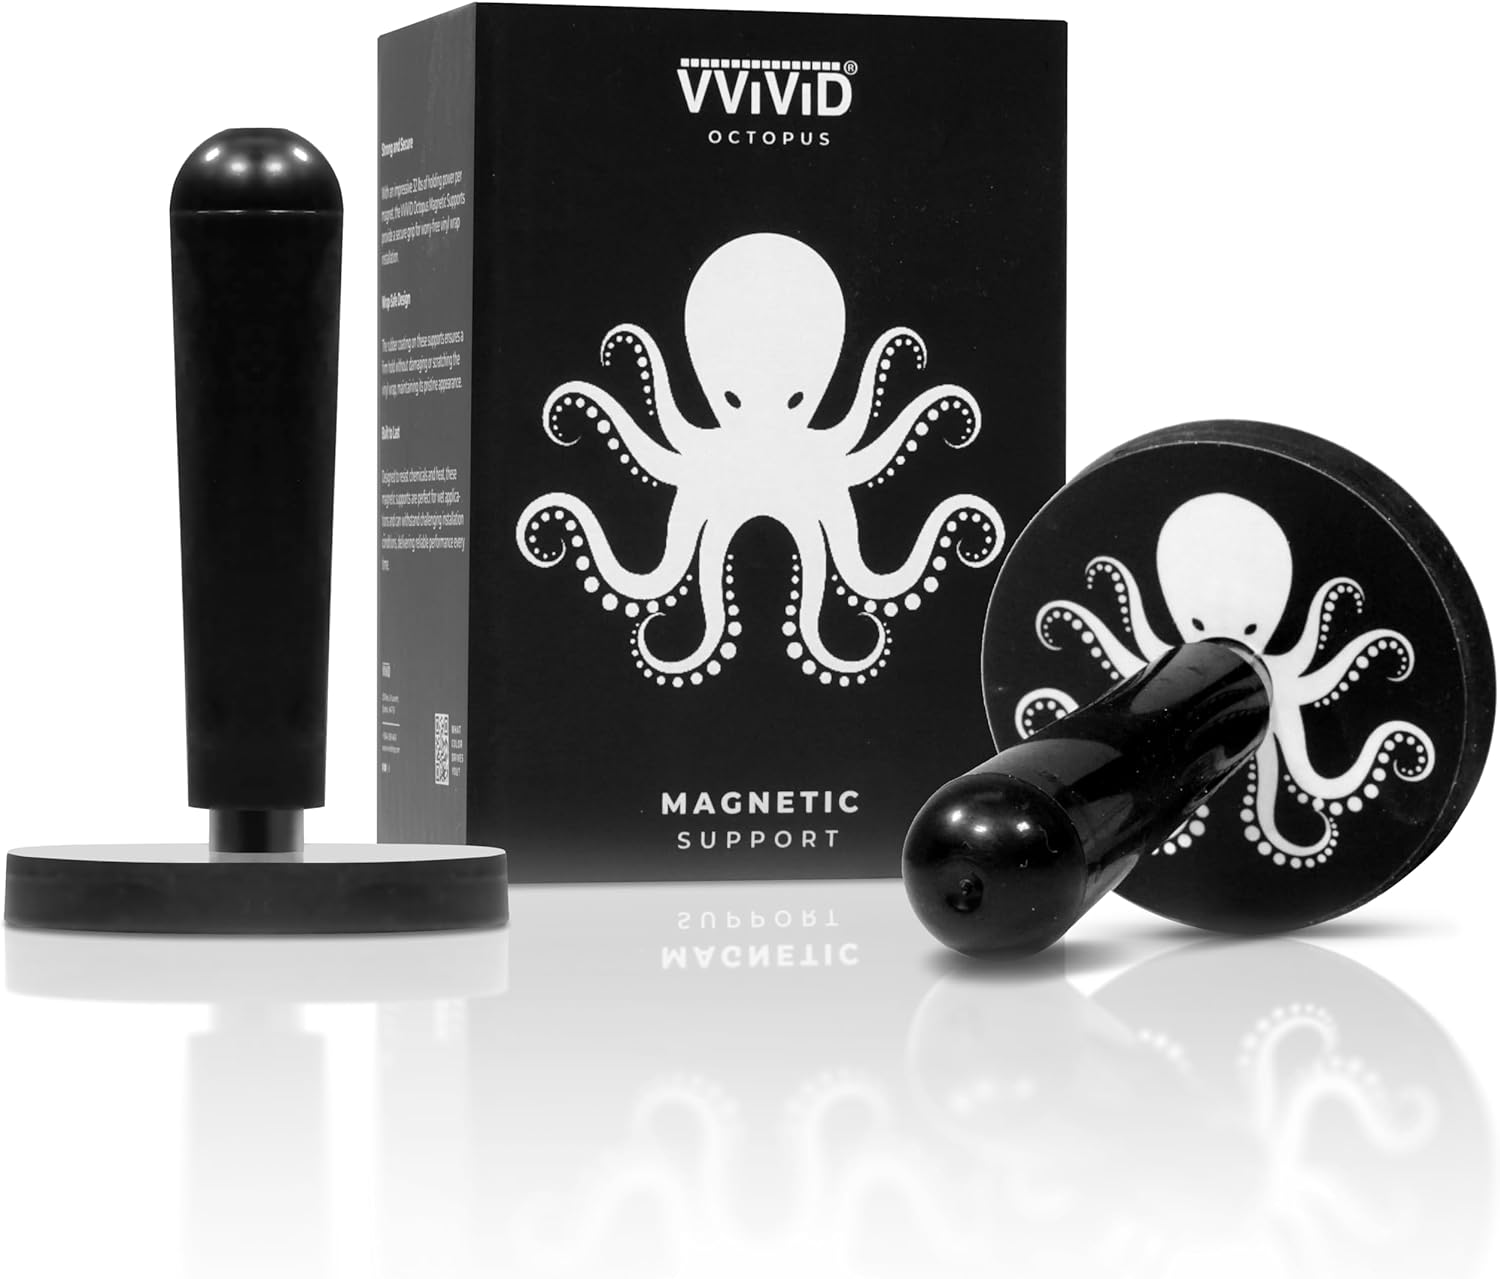 Octopus Magnets Rubber Coated for Scratch Free Vinyl Installation (MCF)